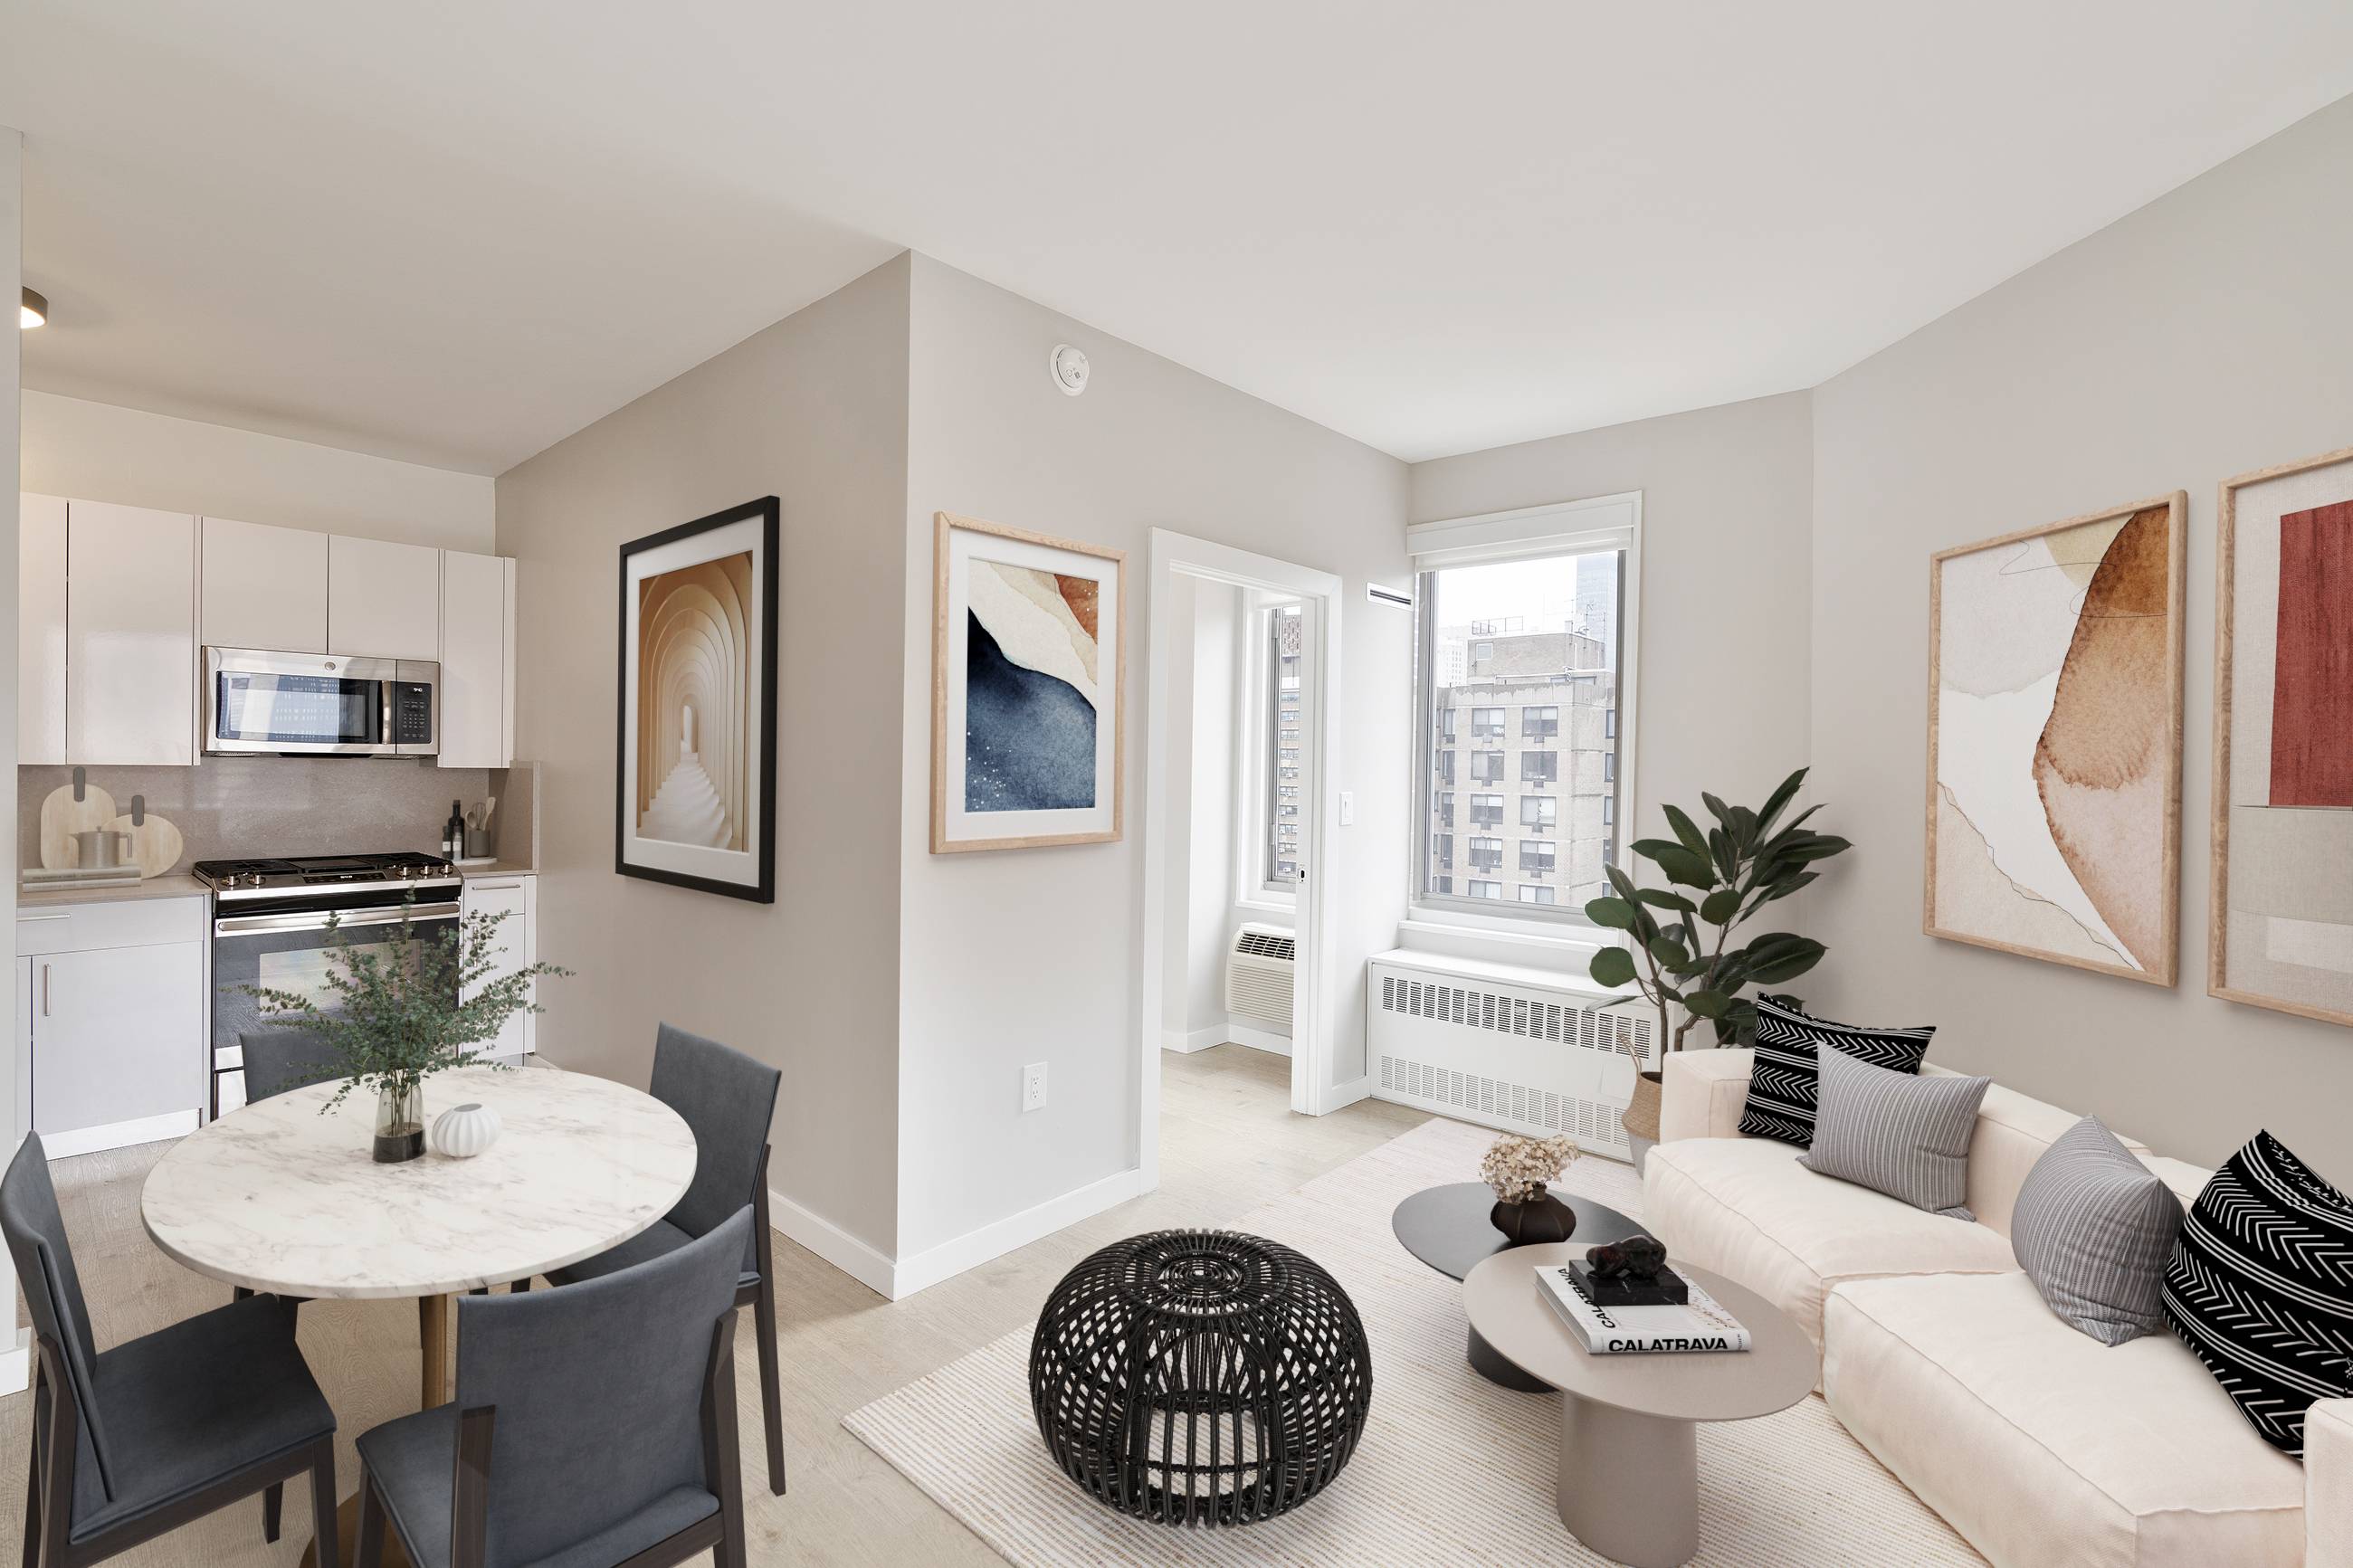 PRIME SECOND AVE LOCATION - 4 BED / 2 BATH WITH A PRIVATE TERRACE IN FULL SERVICE BUILDING